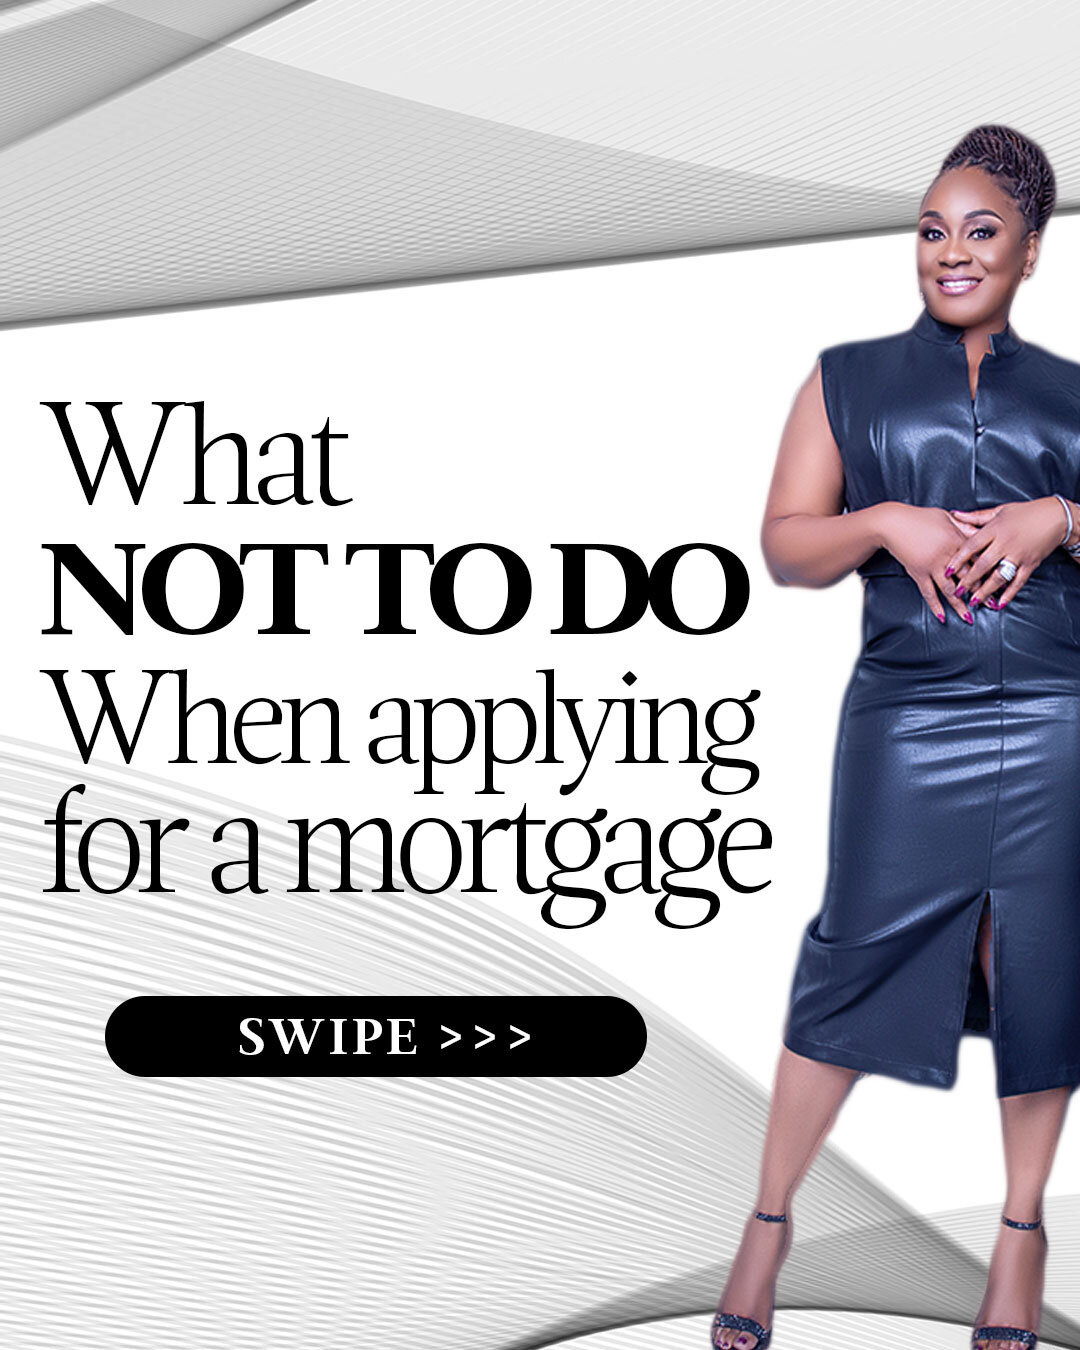 Securing a mortgage can be both exciting and nerve-wracking. You may worry about making costly missteps that could jeopardize your homeownership dreams or even have a fear of rejection. 

I'll be honest, this process can feel overwhelming as a first-